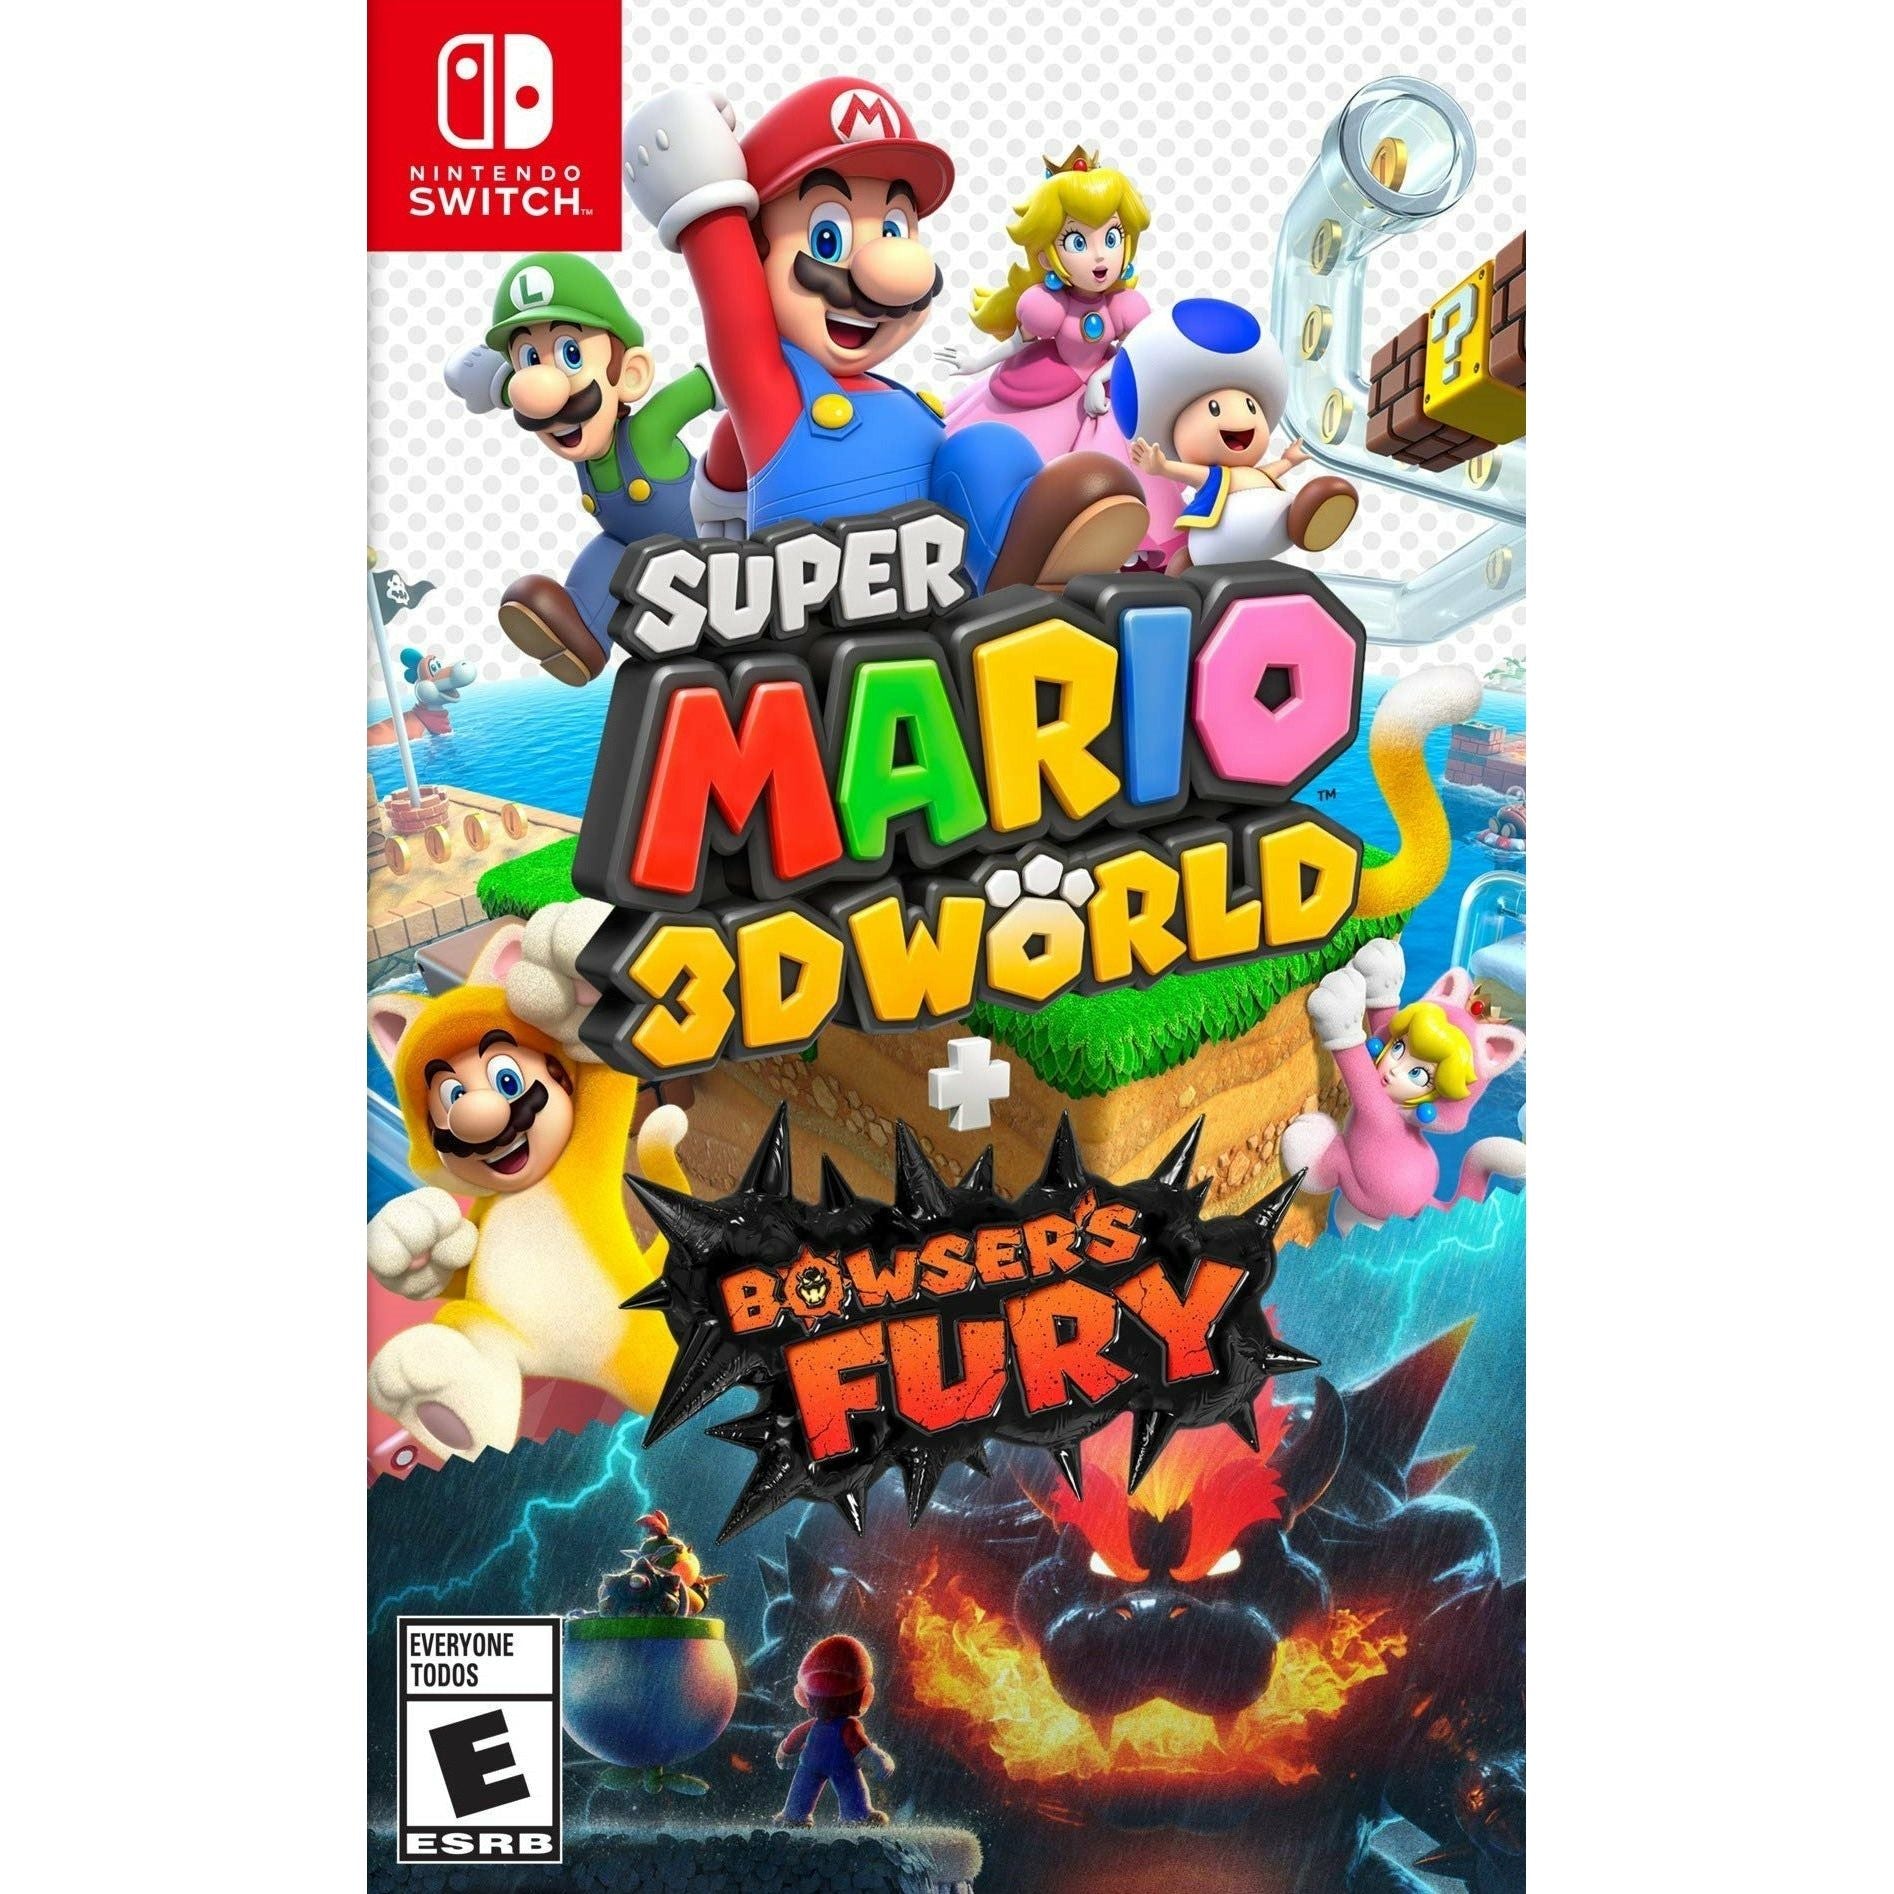 Switch - Super Mario 3D World + Bower's Fury (In Case)